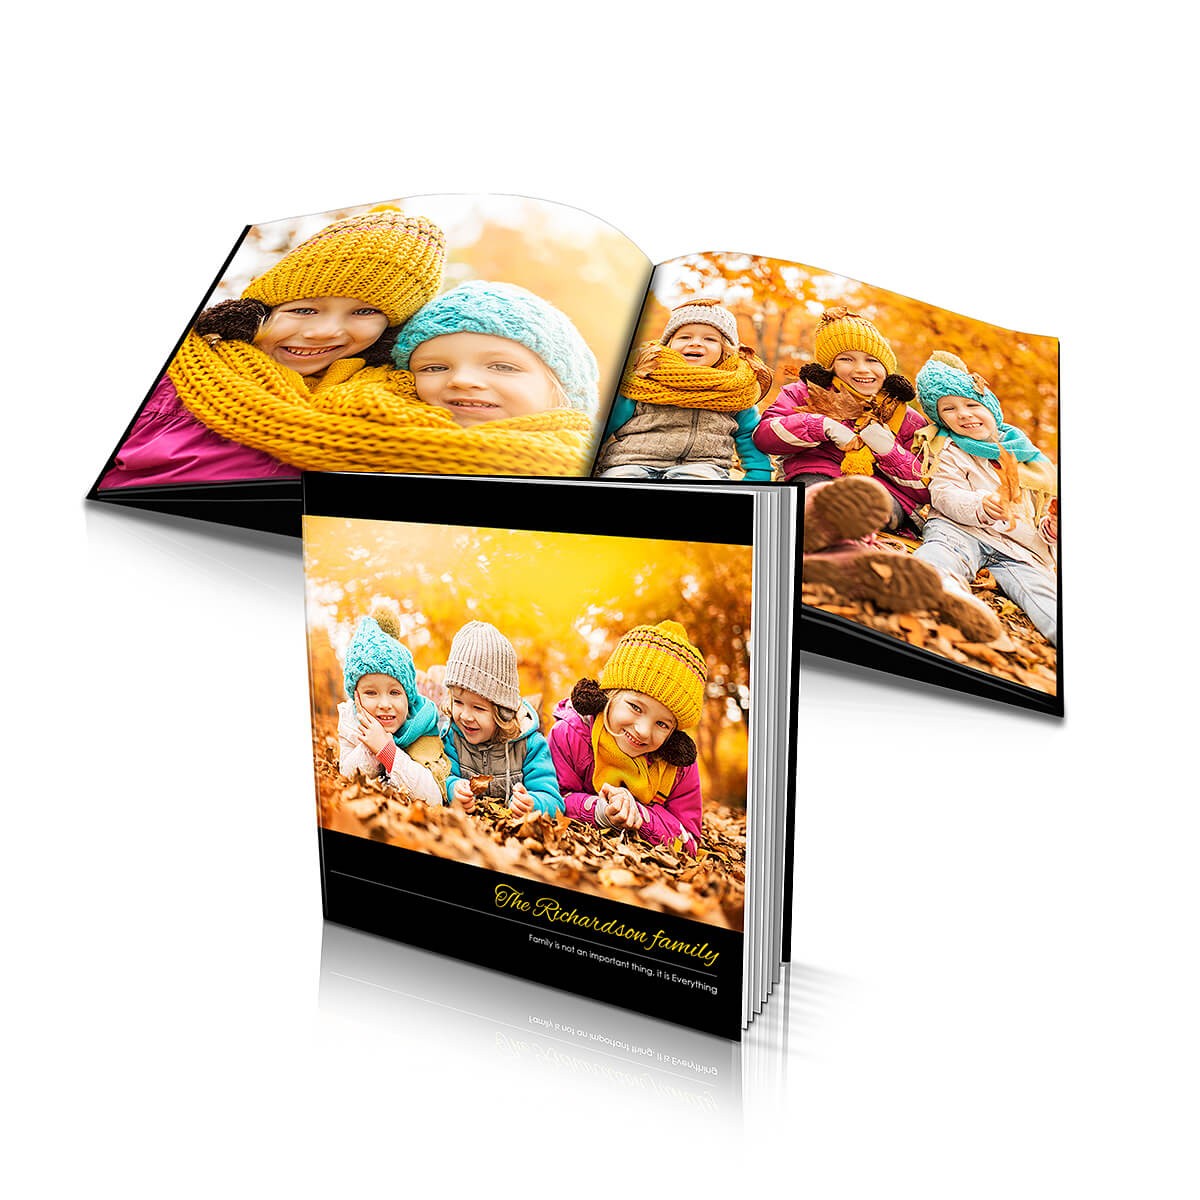 6"x6" (15x15cm) Soft Cover Book 40 pages